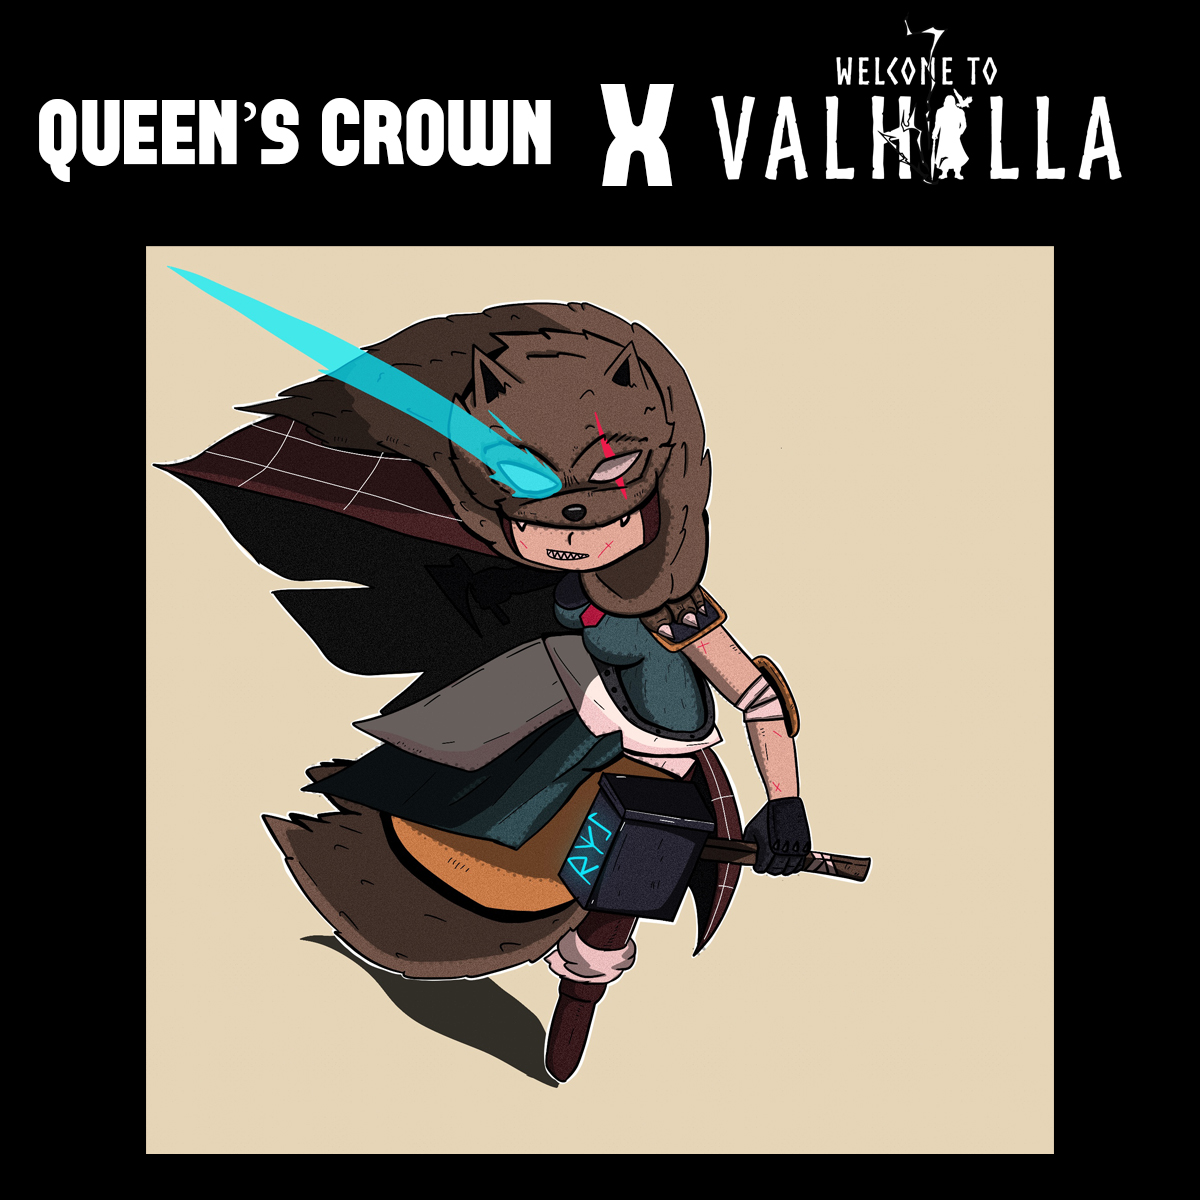 Collaboration X collection Welcome to Valhalla
 Check it now on opensea.io/collection/que…
 #NFT #NFTTHAILAND #OPENSEA #NFTProject #NFTartist #art #Thailand #QueensCrown #illustrator  #napaart